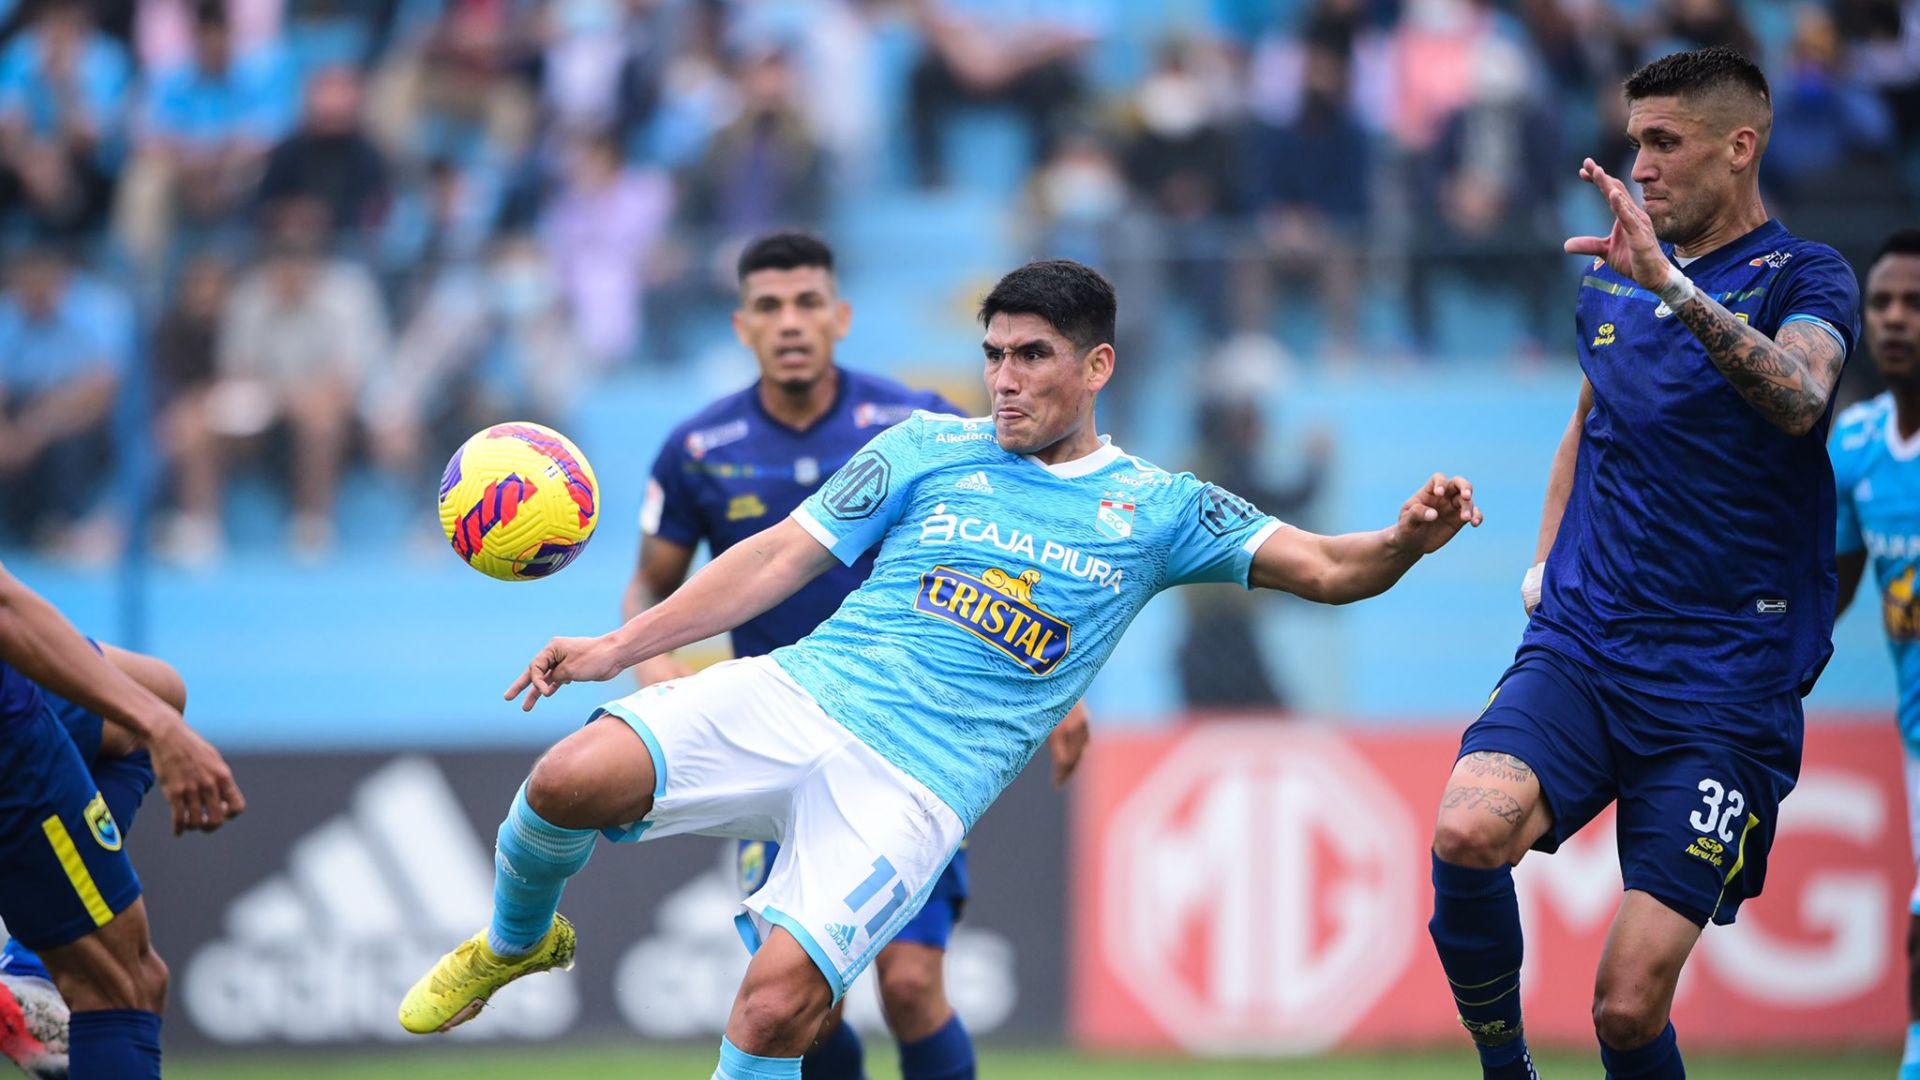 Sporting Cristal vs Carlos Stein: match for date 7 of the Closing Tournament of League 1